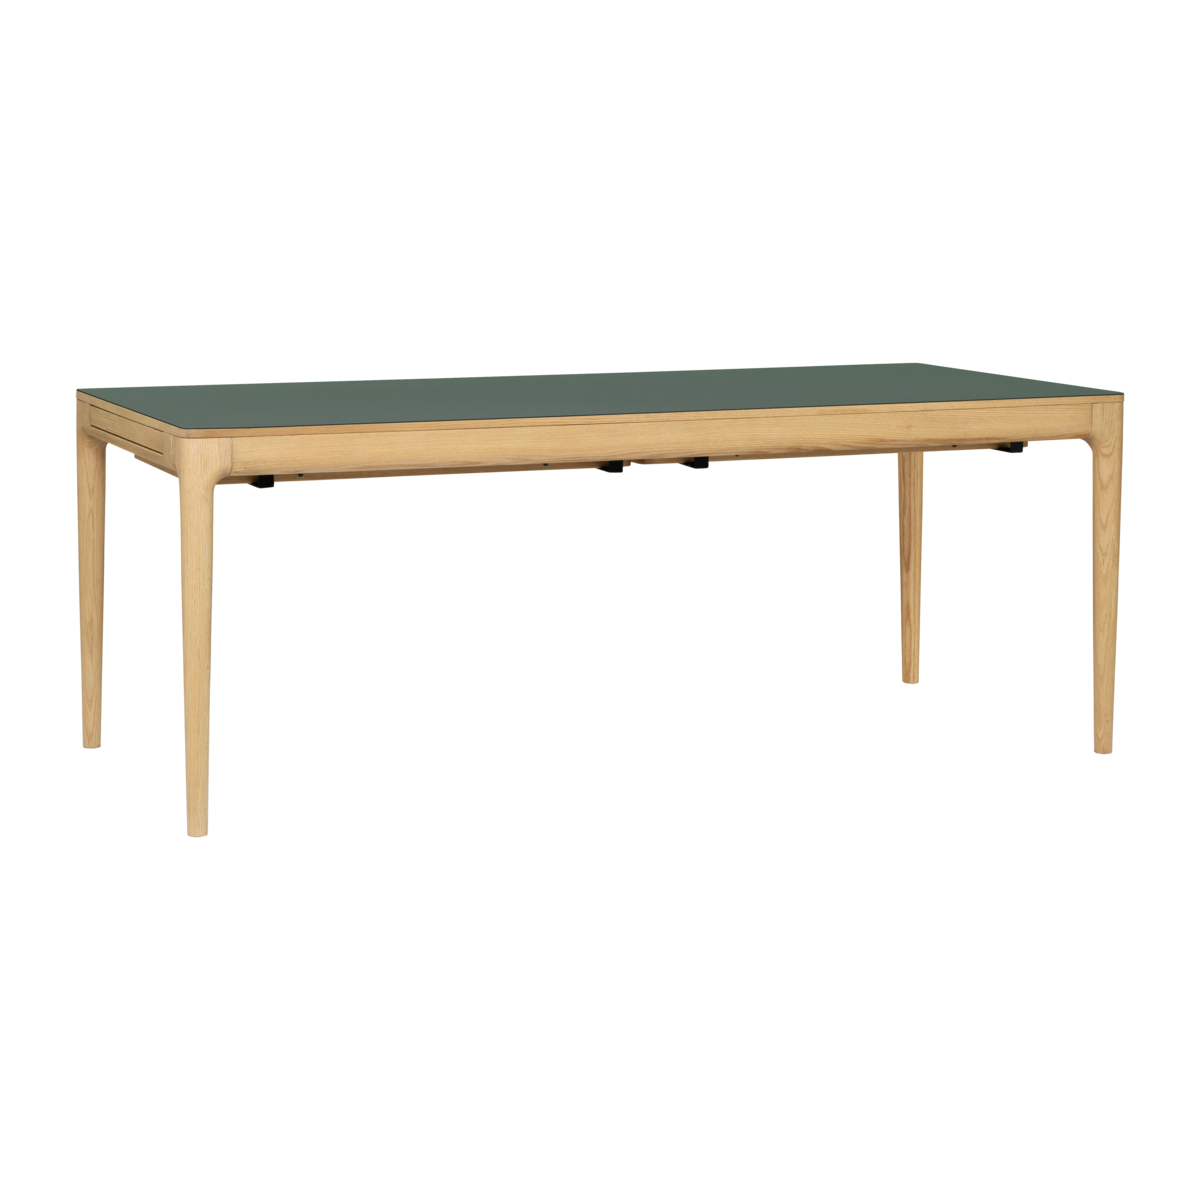 HEART 'N' SOUL | DINING TABLE 200 with 'FENIX' TOP